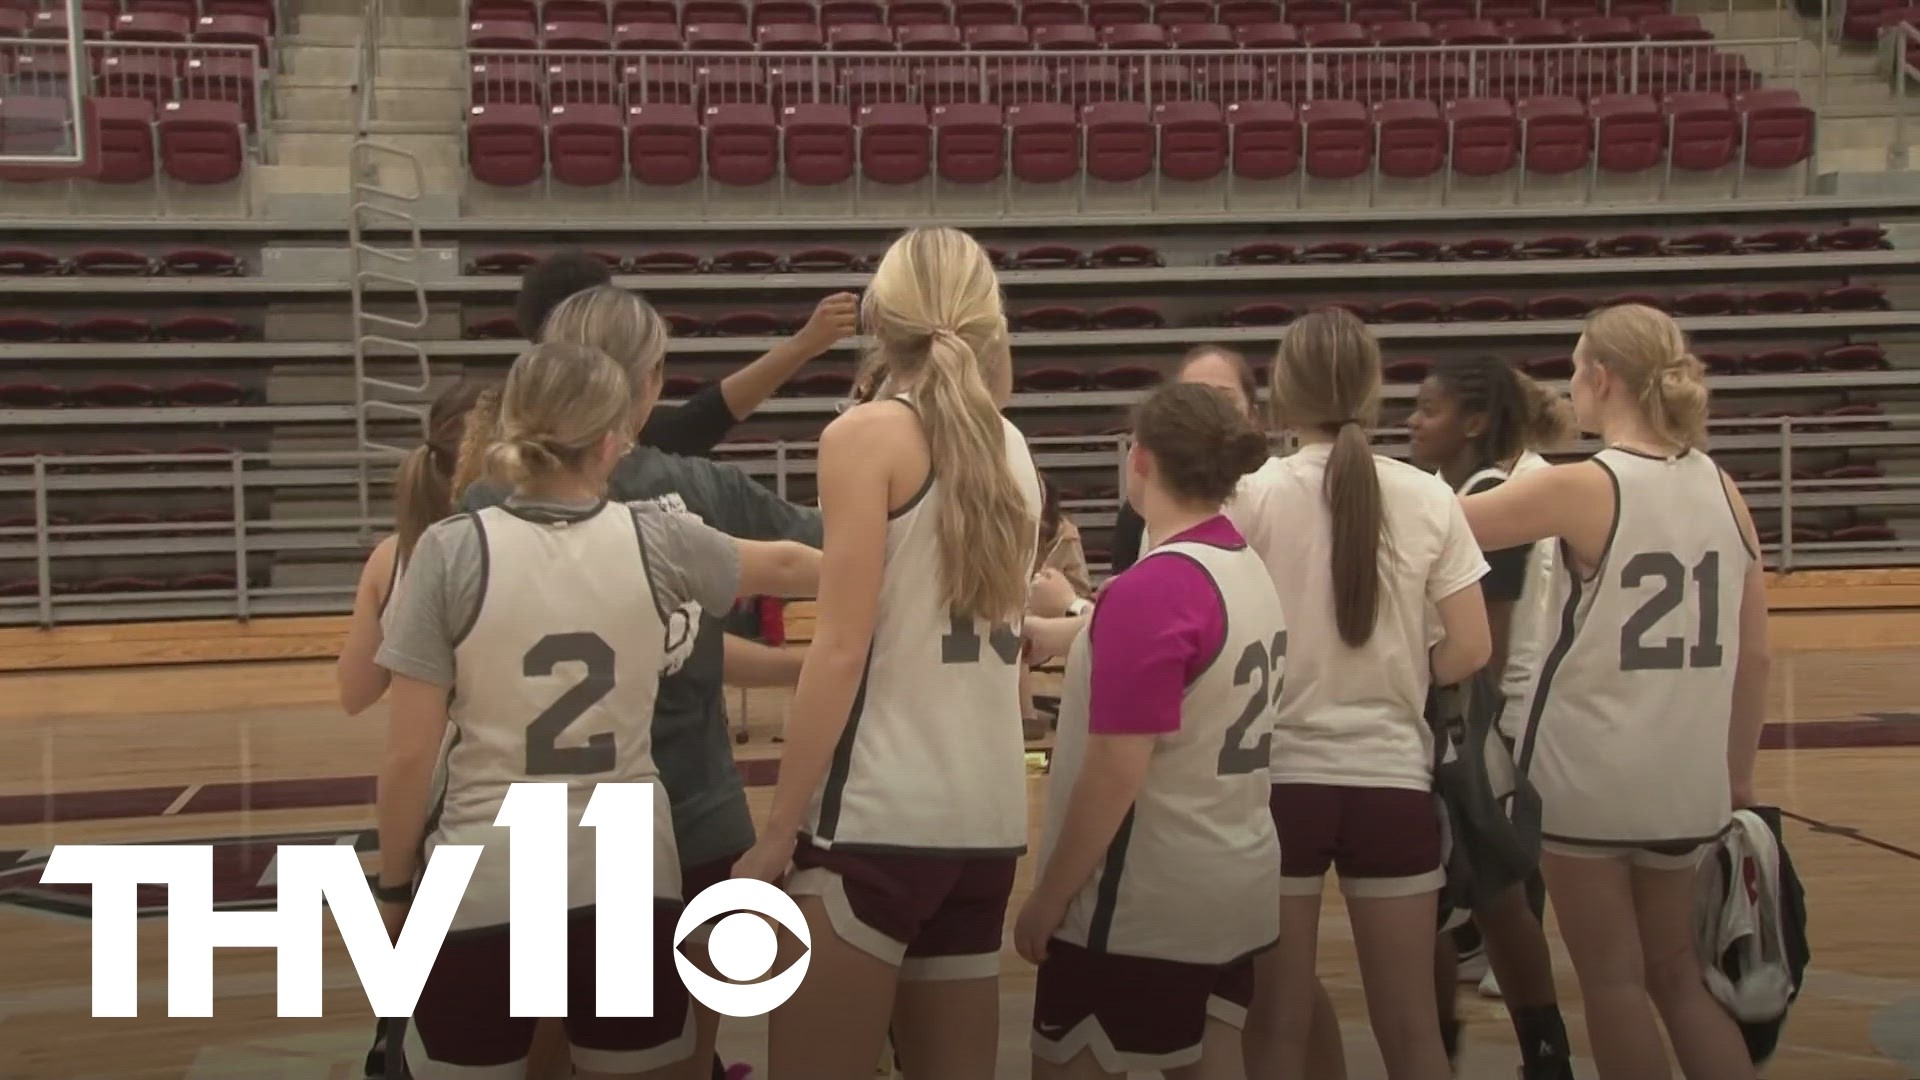 The Morrilton girl's basketball team is now heading to their first title game since 2009.